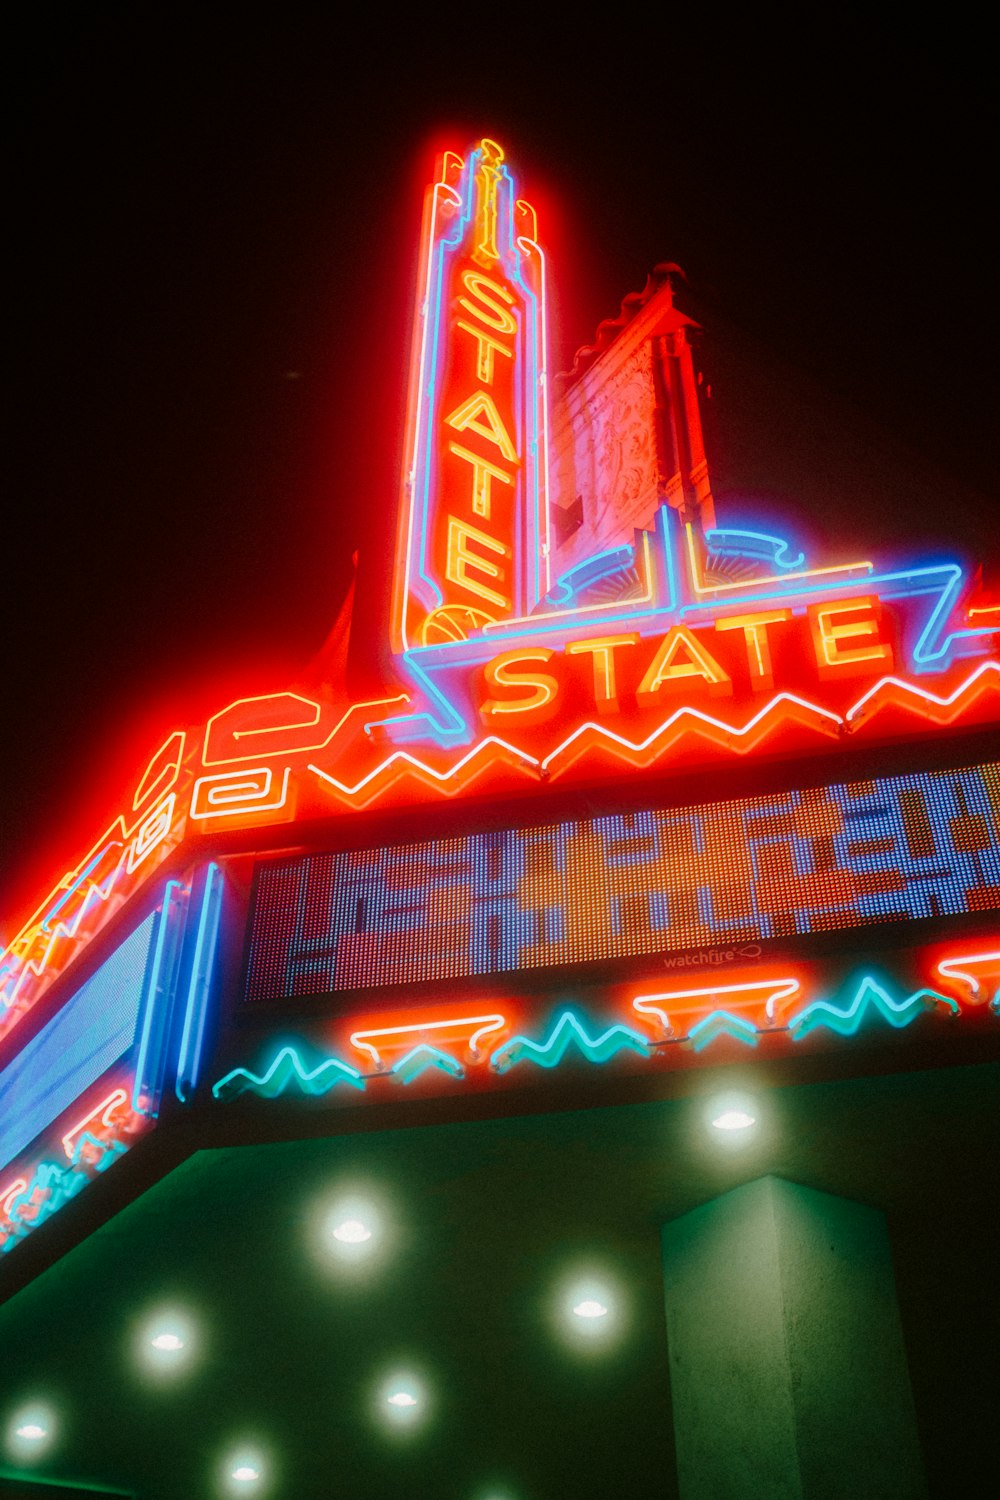 a theater sign lit up at night time